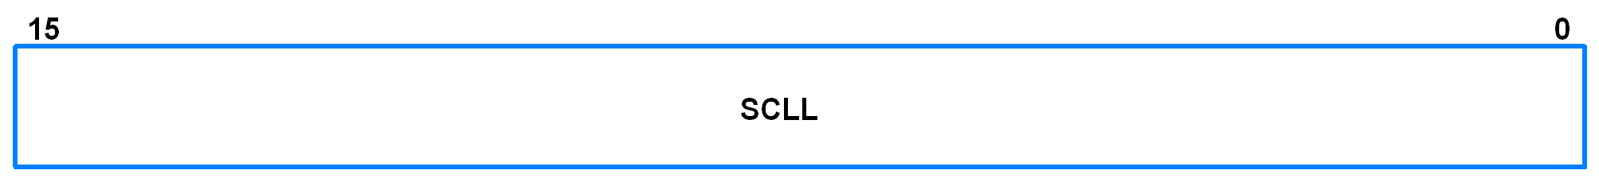 I2C0SCLL (I2C0 SCL Low Duty Cycle Register)